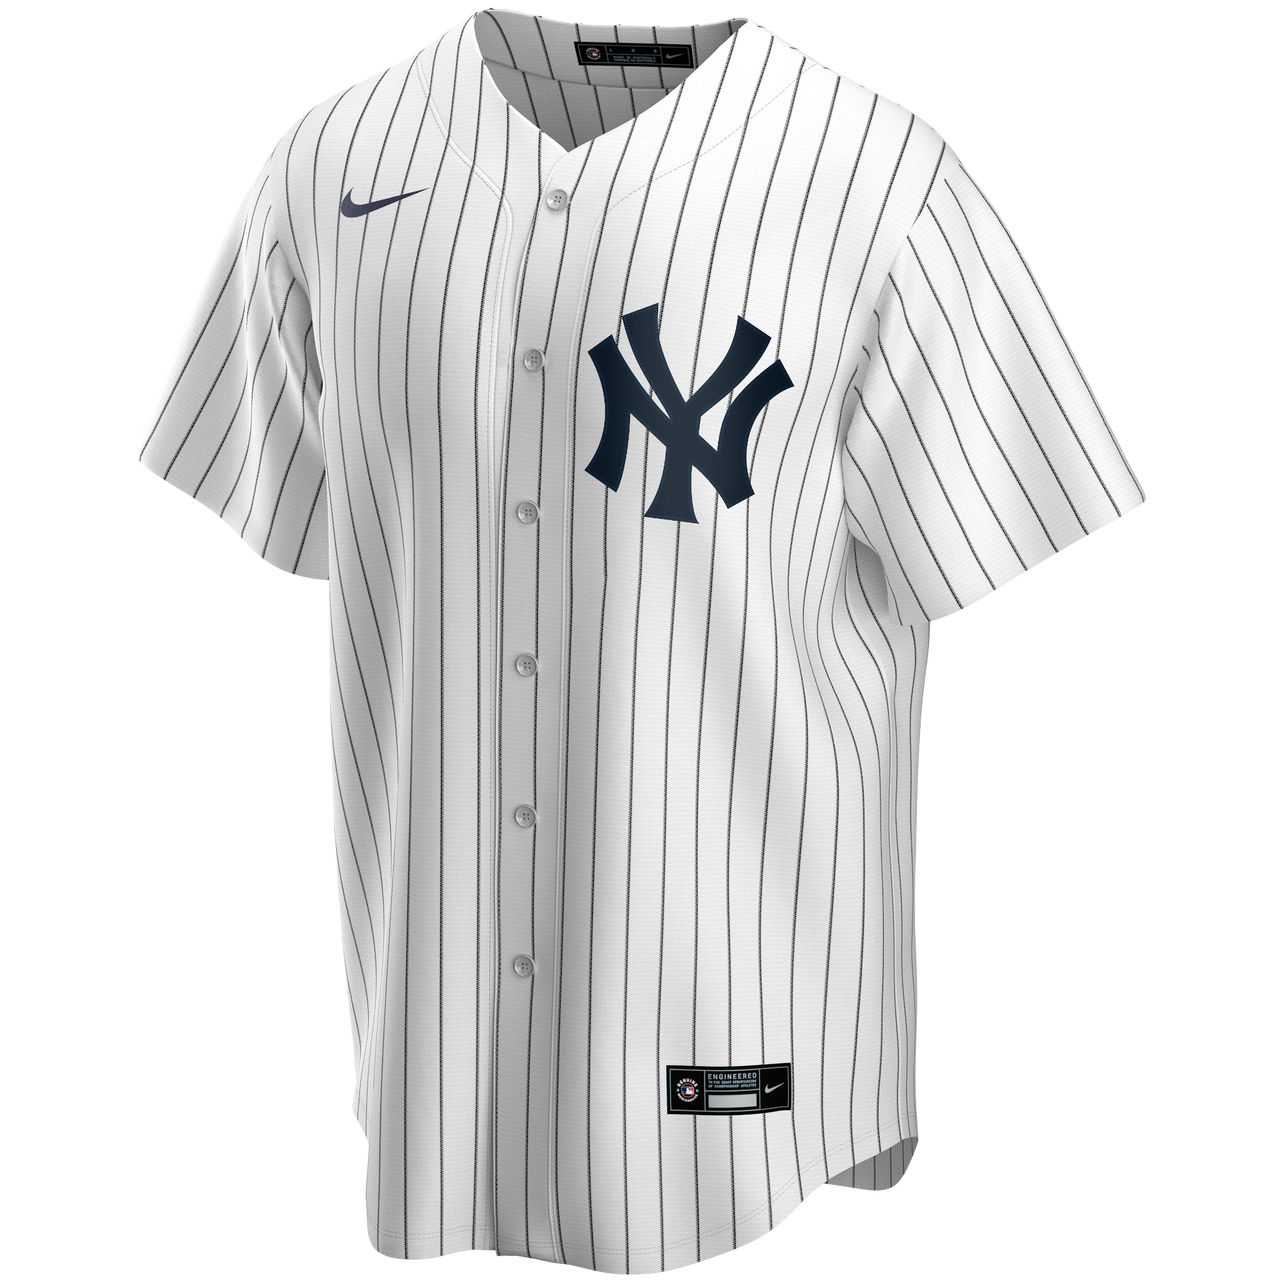 Babe Ruth New York Yankees Jersey Number Kit, Authentic Home